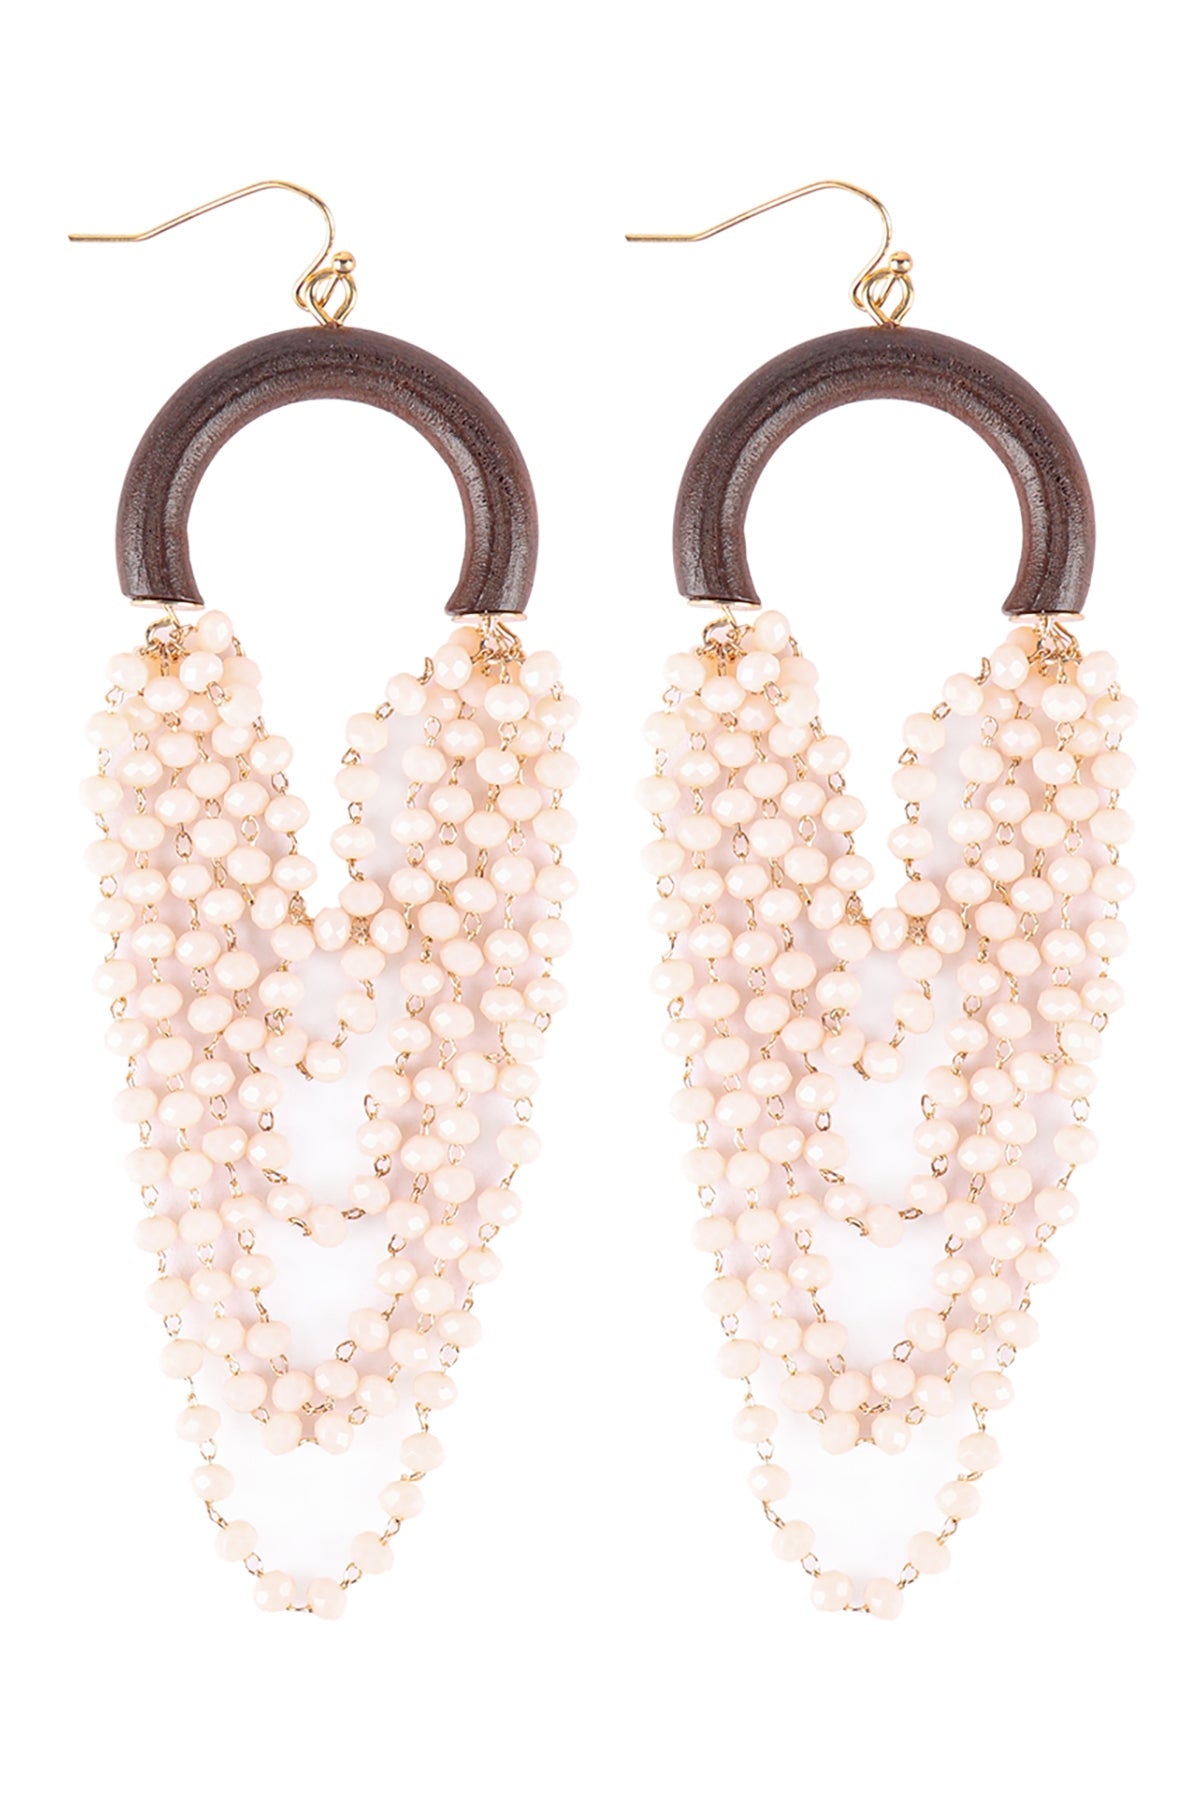 LAYERED STATEMENT HOOK EARRINGS/6PCS (NOW $2.00 ONLY!)